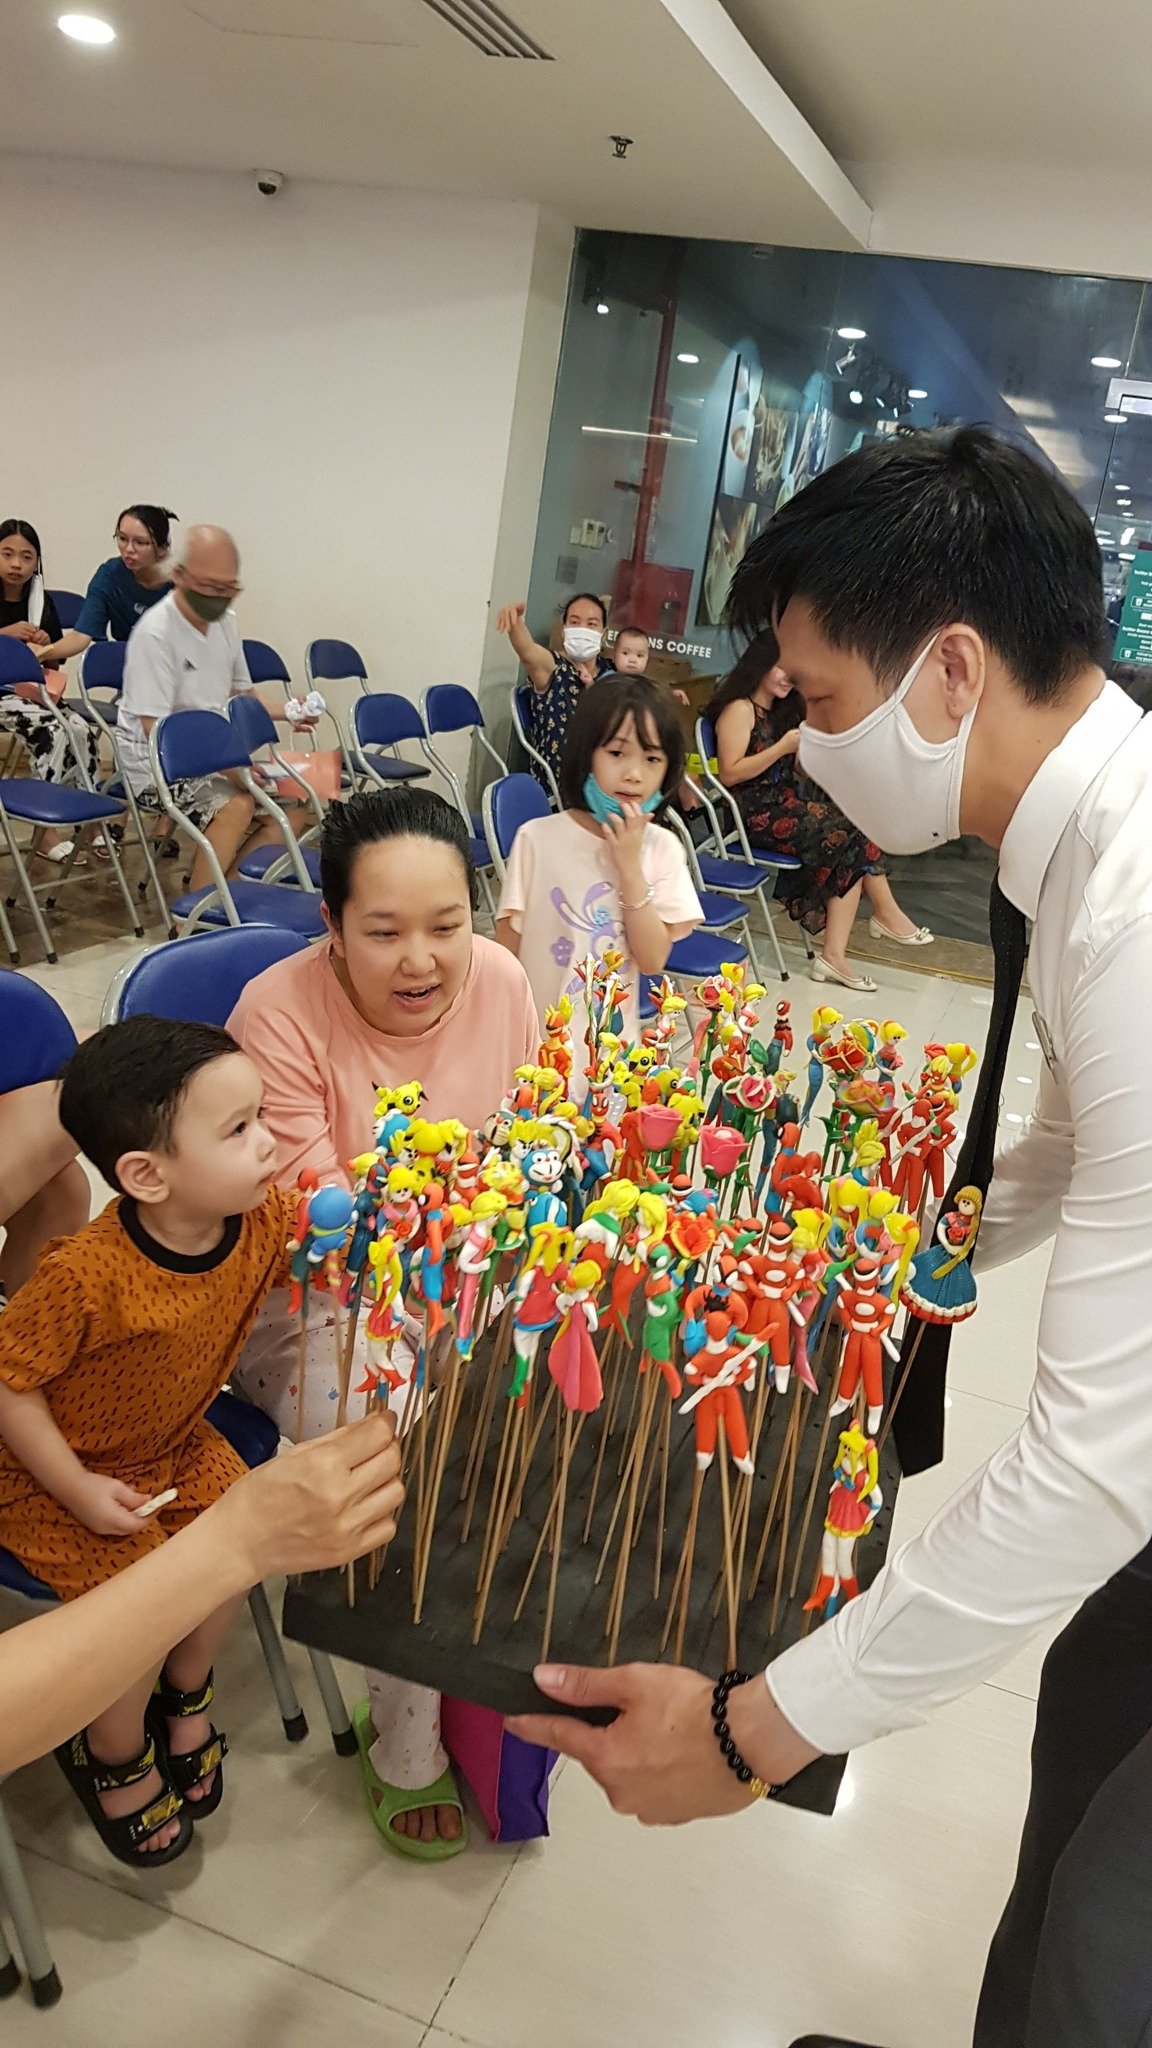 Hundreds of children and parents who are residents of the property participated in the event